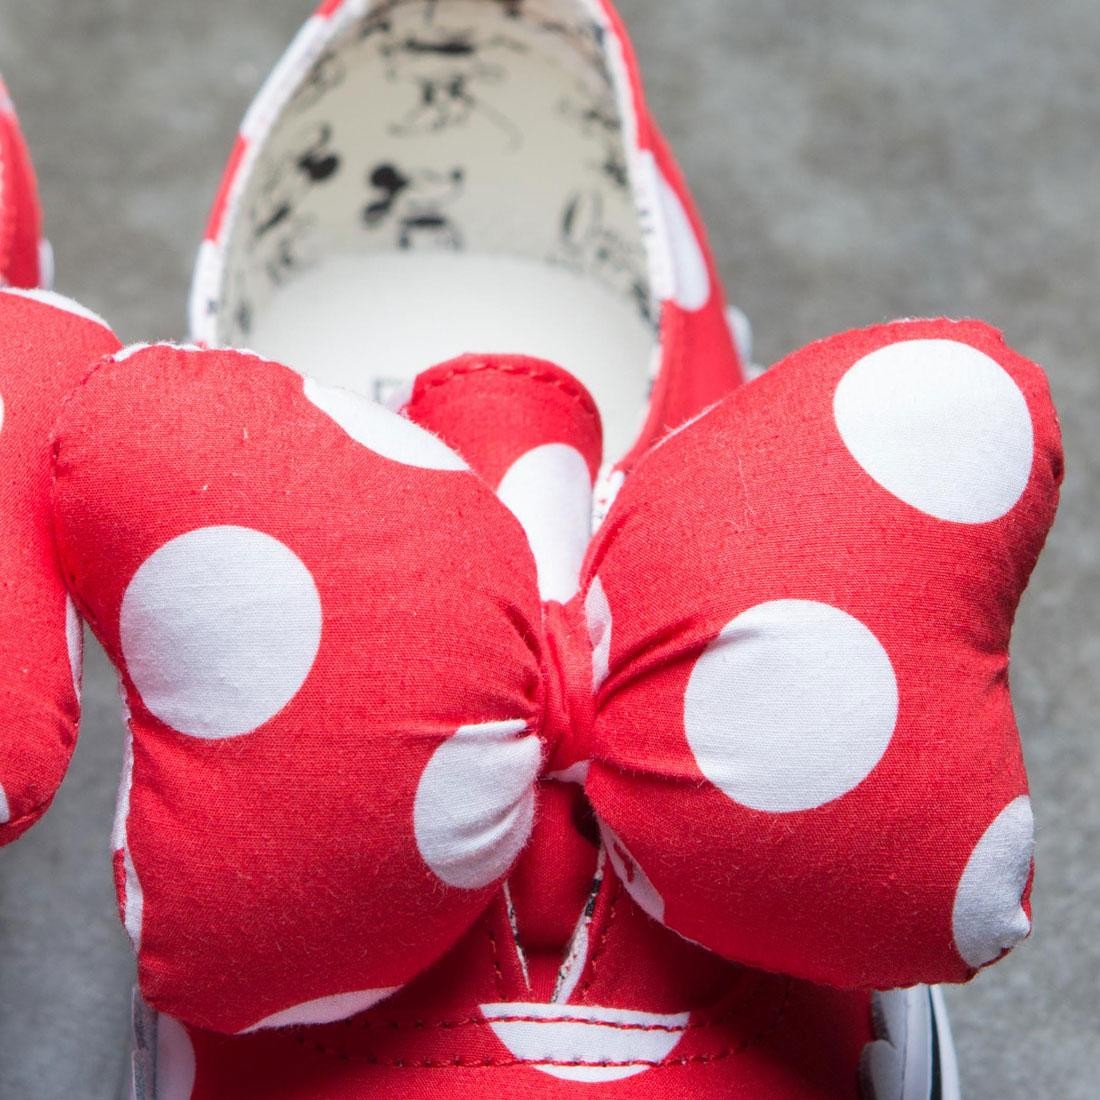 red minnie mouse vans